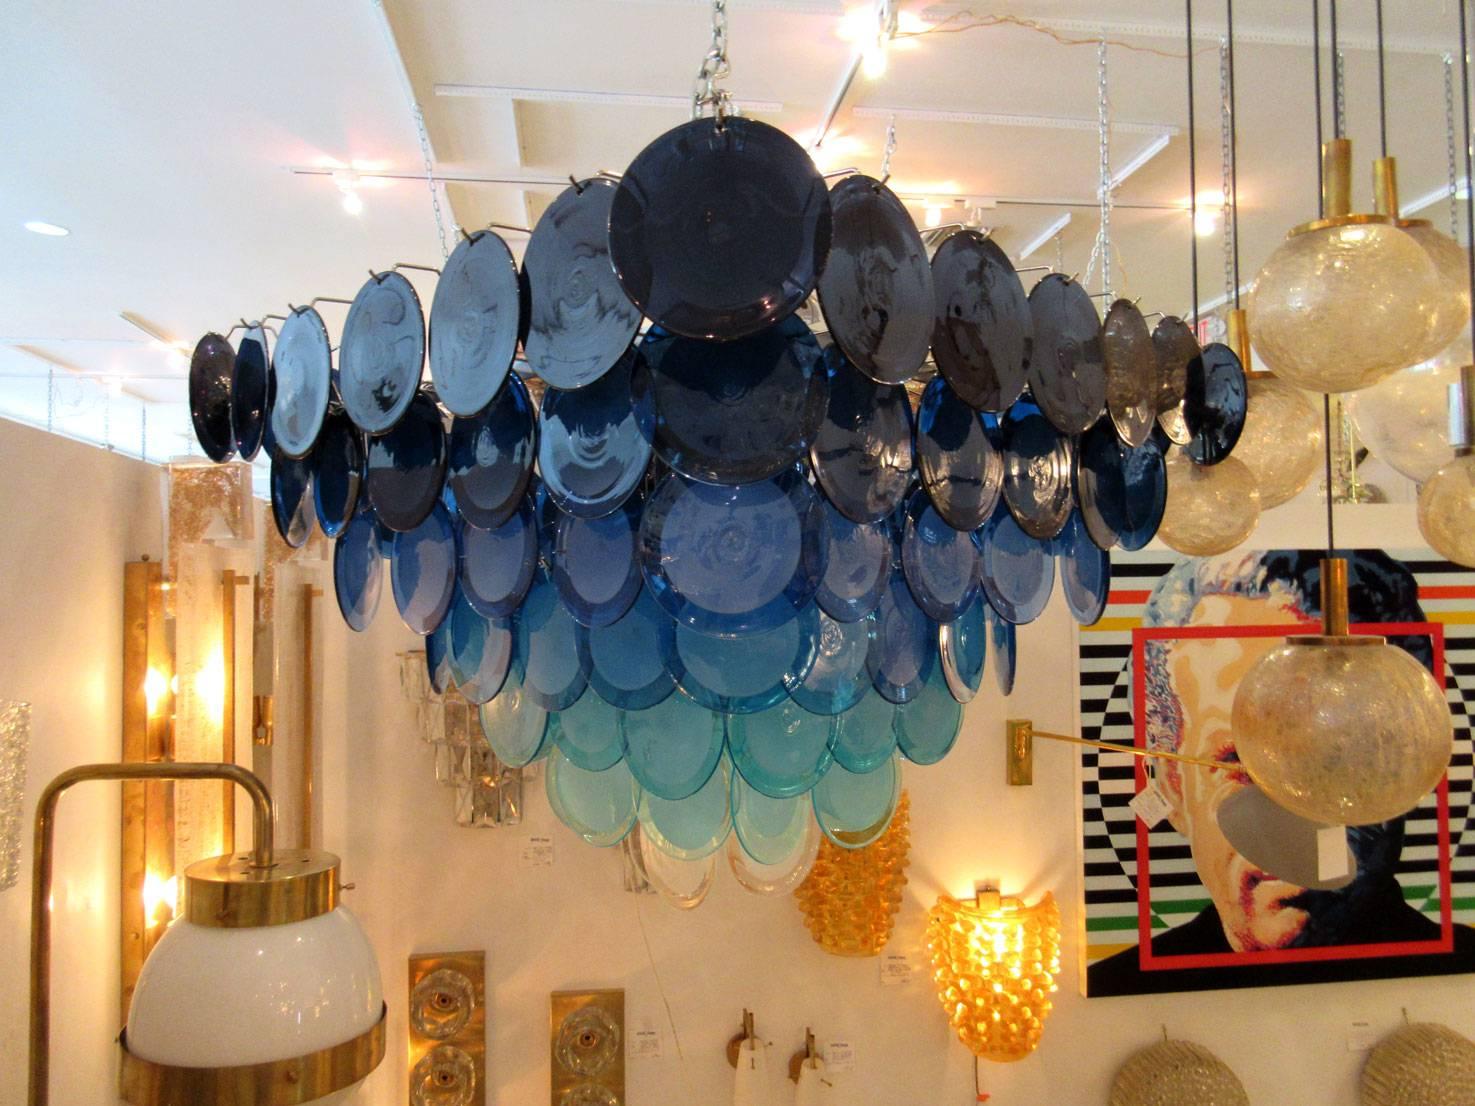 Gorgeous seven-tiered Murano glass disc chandelier by Vistosi. The 100 individual glass discs are arranged in an inverted pyramid shape, and the colors form an ombre gradient from dark navy to a rich royal blue to light blue to white. The armature